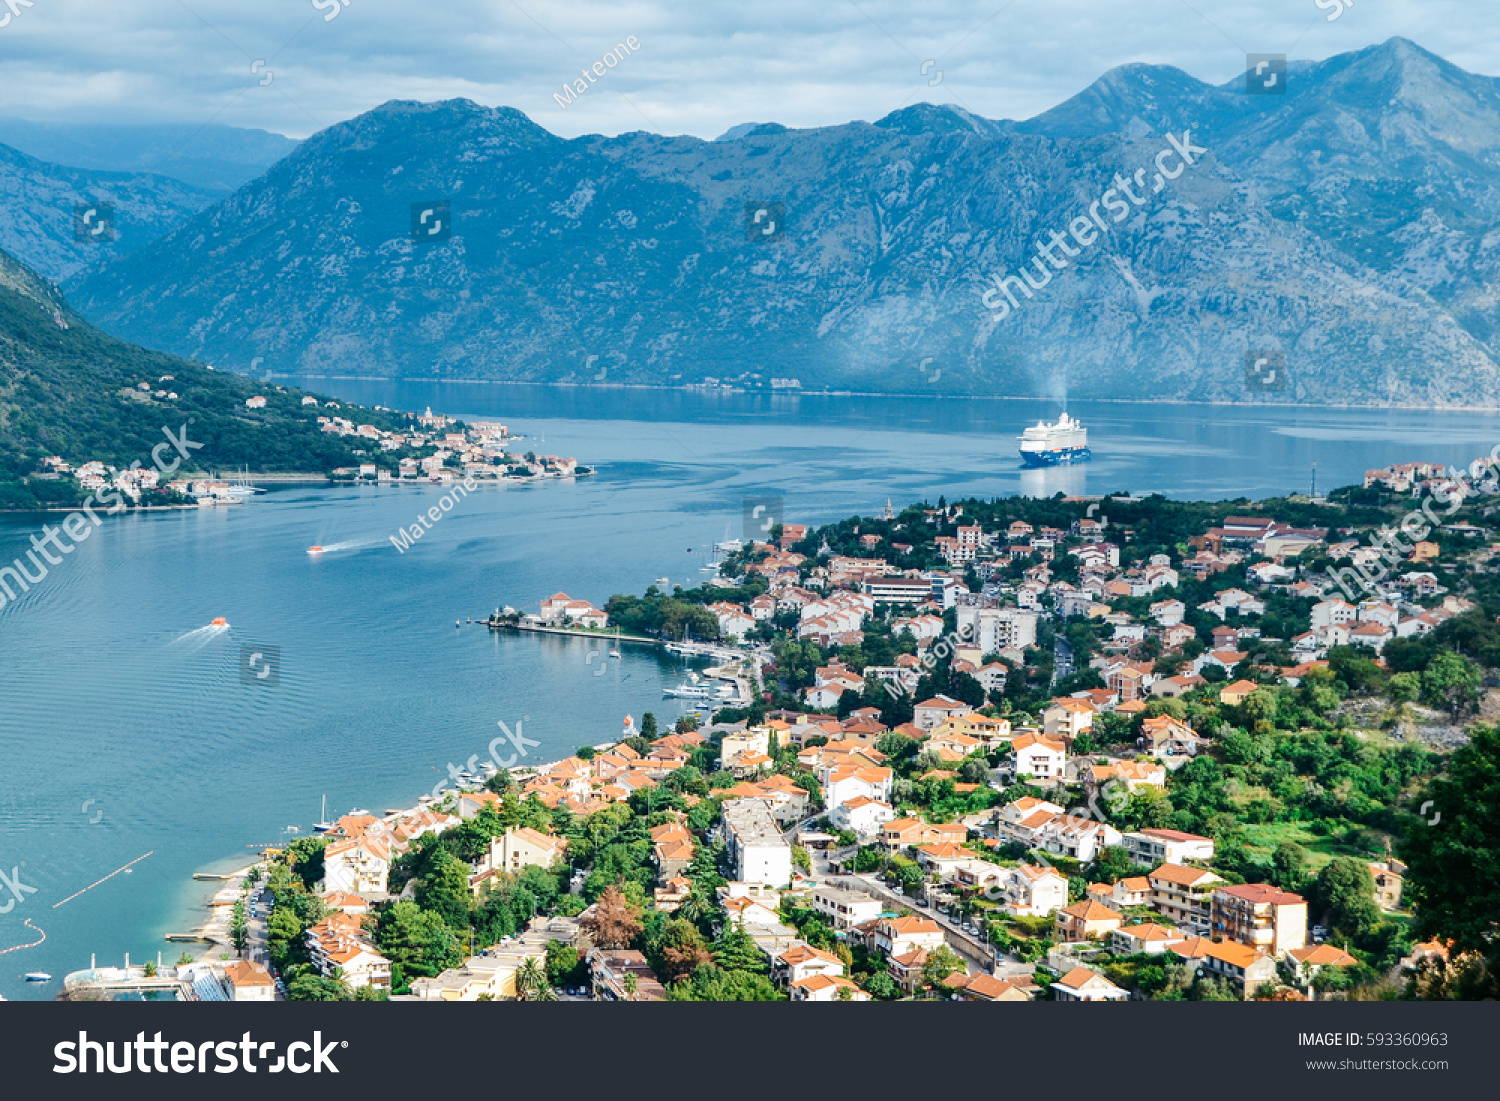 Panoramic view of port, town and mountains in Kotor, Montenegro #593360963